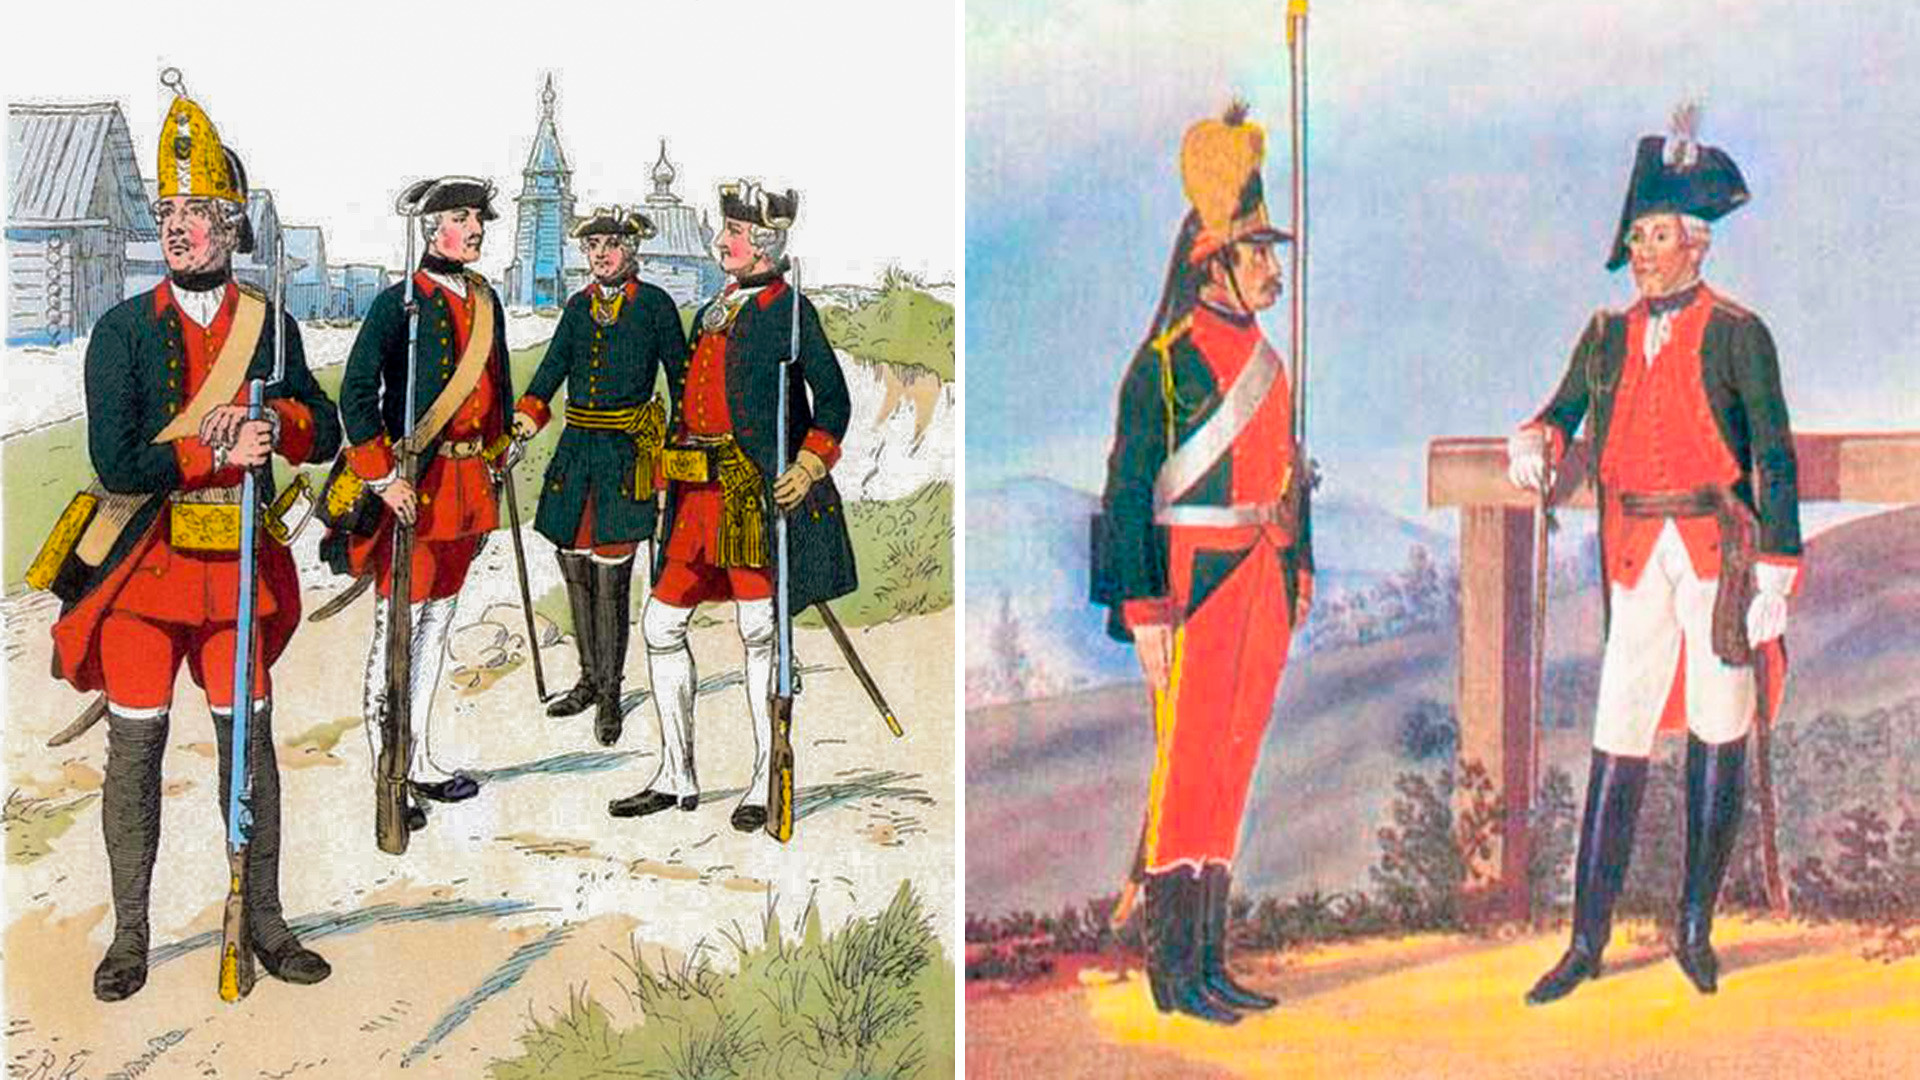 Russian military uniform before and after the Potemkin's reform